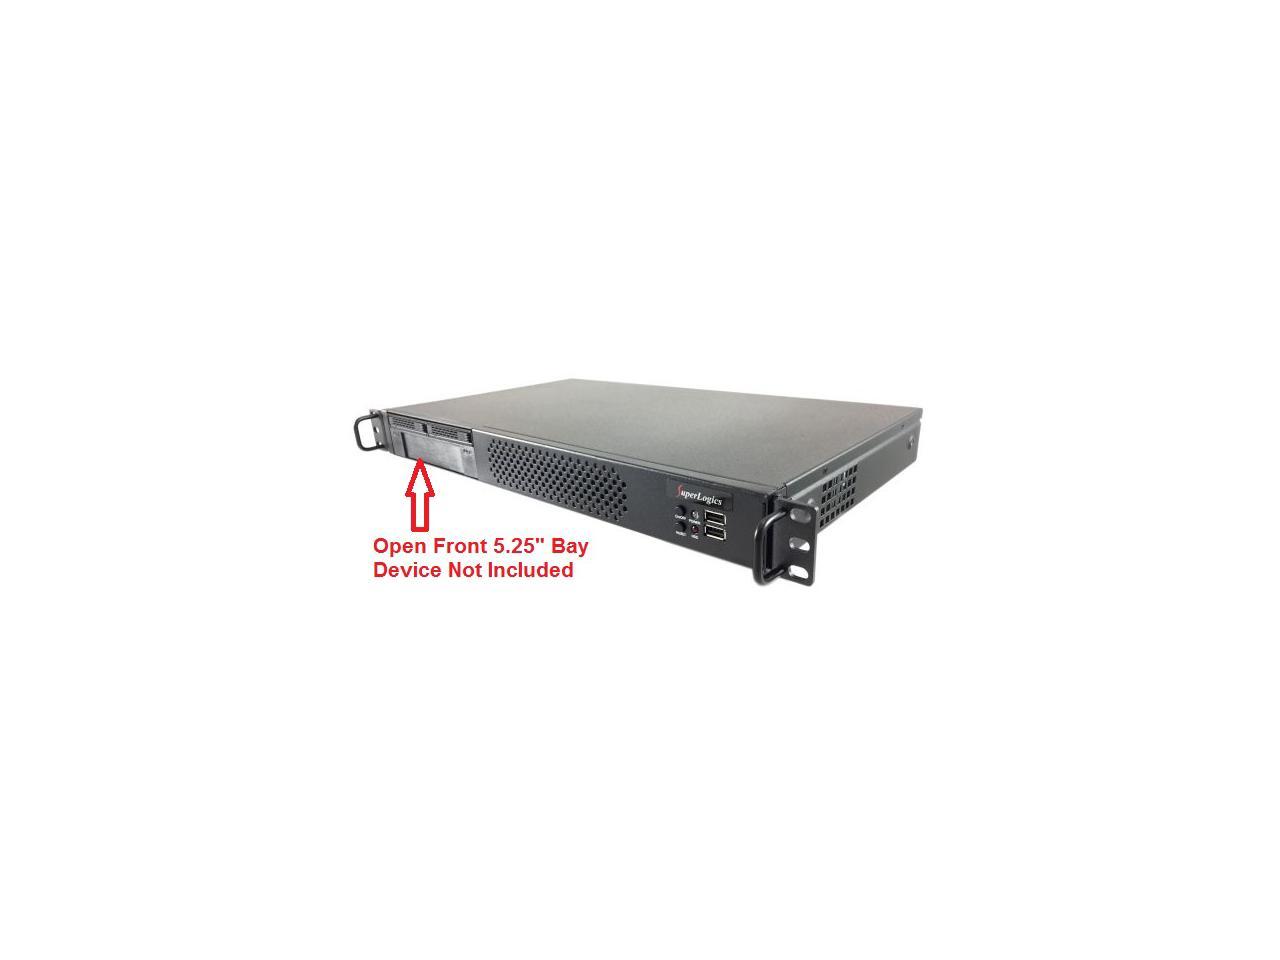 1U Short Depth Rackmount Case For Itx Motherboard Featuring Front 5.25" Drive Bay, Made In Usa, Model : Sl-Case-R1U-Rdb-Itx